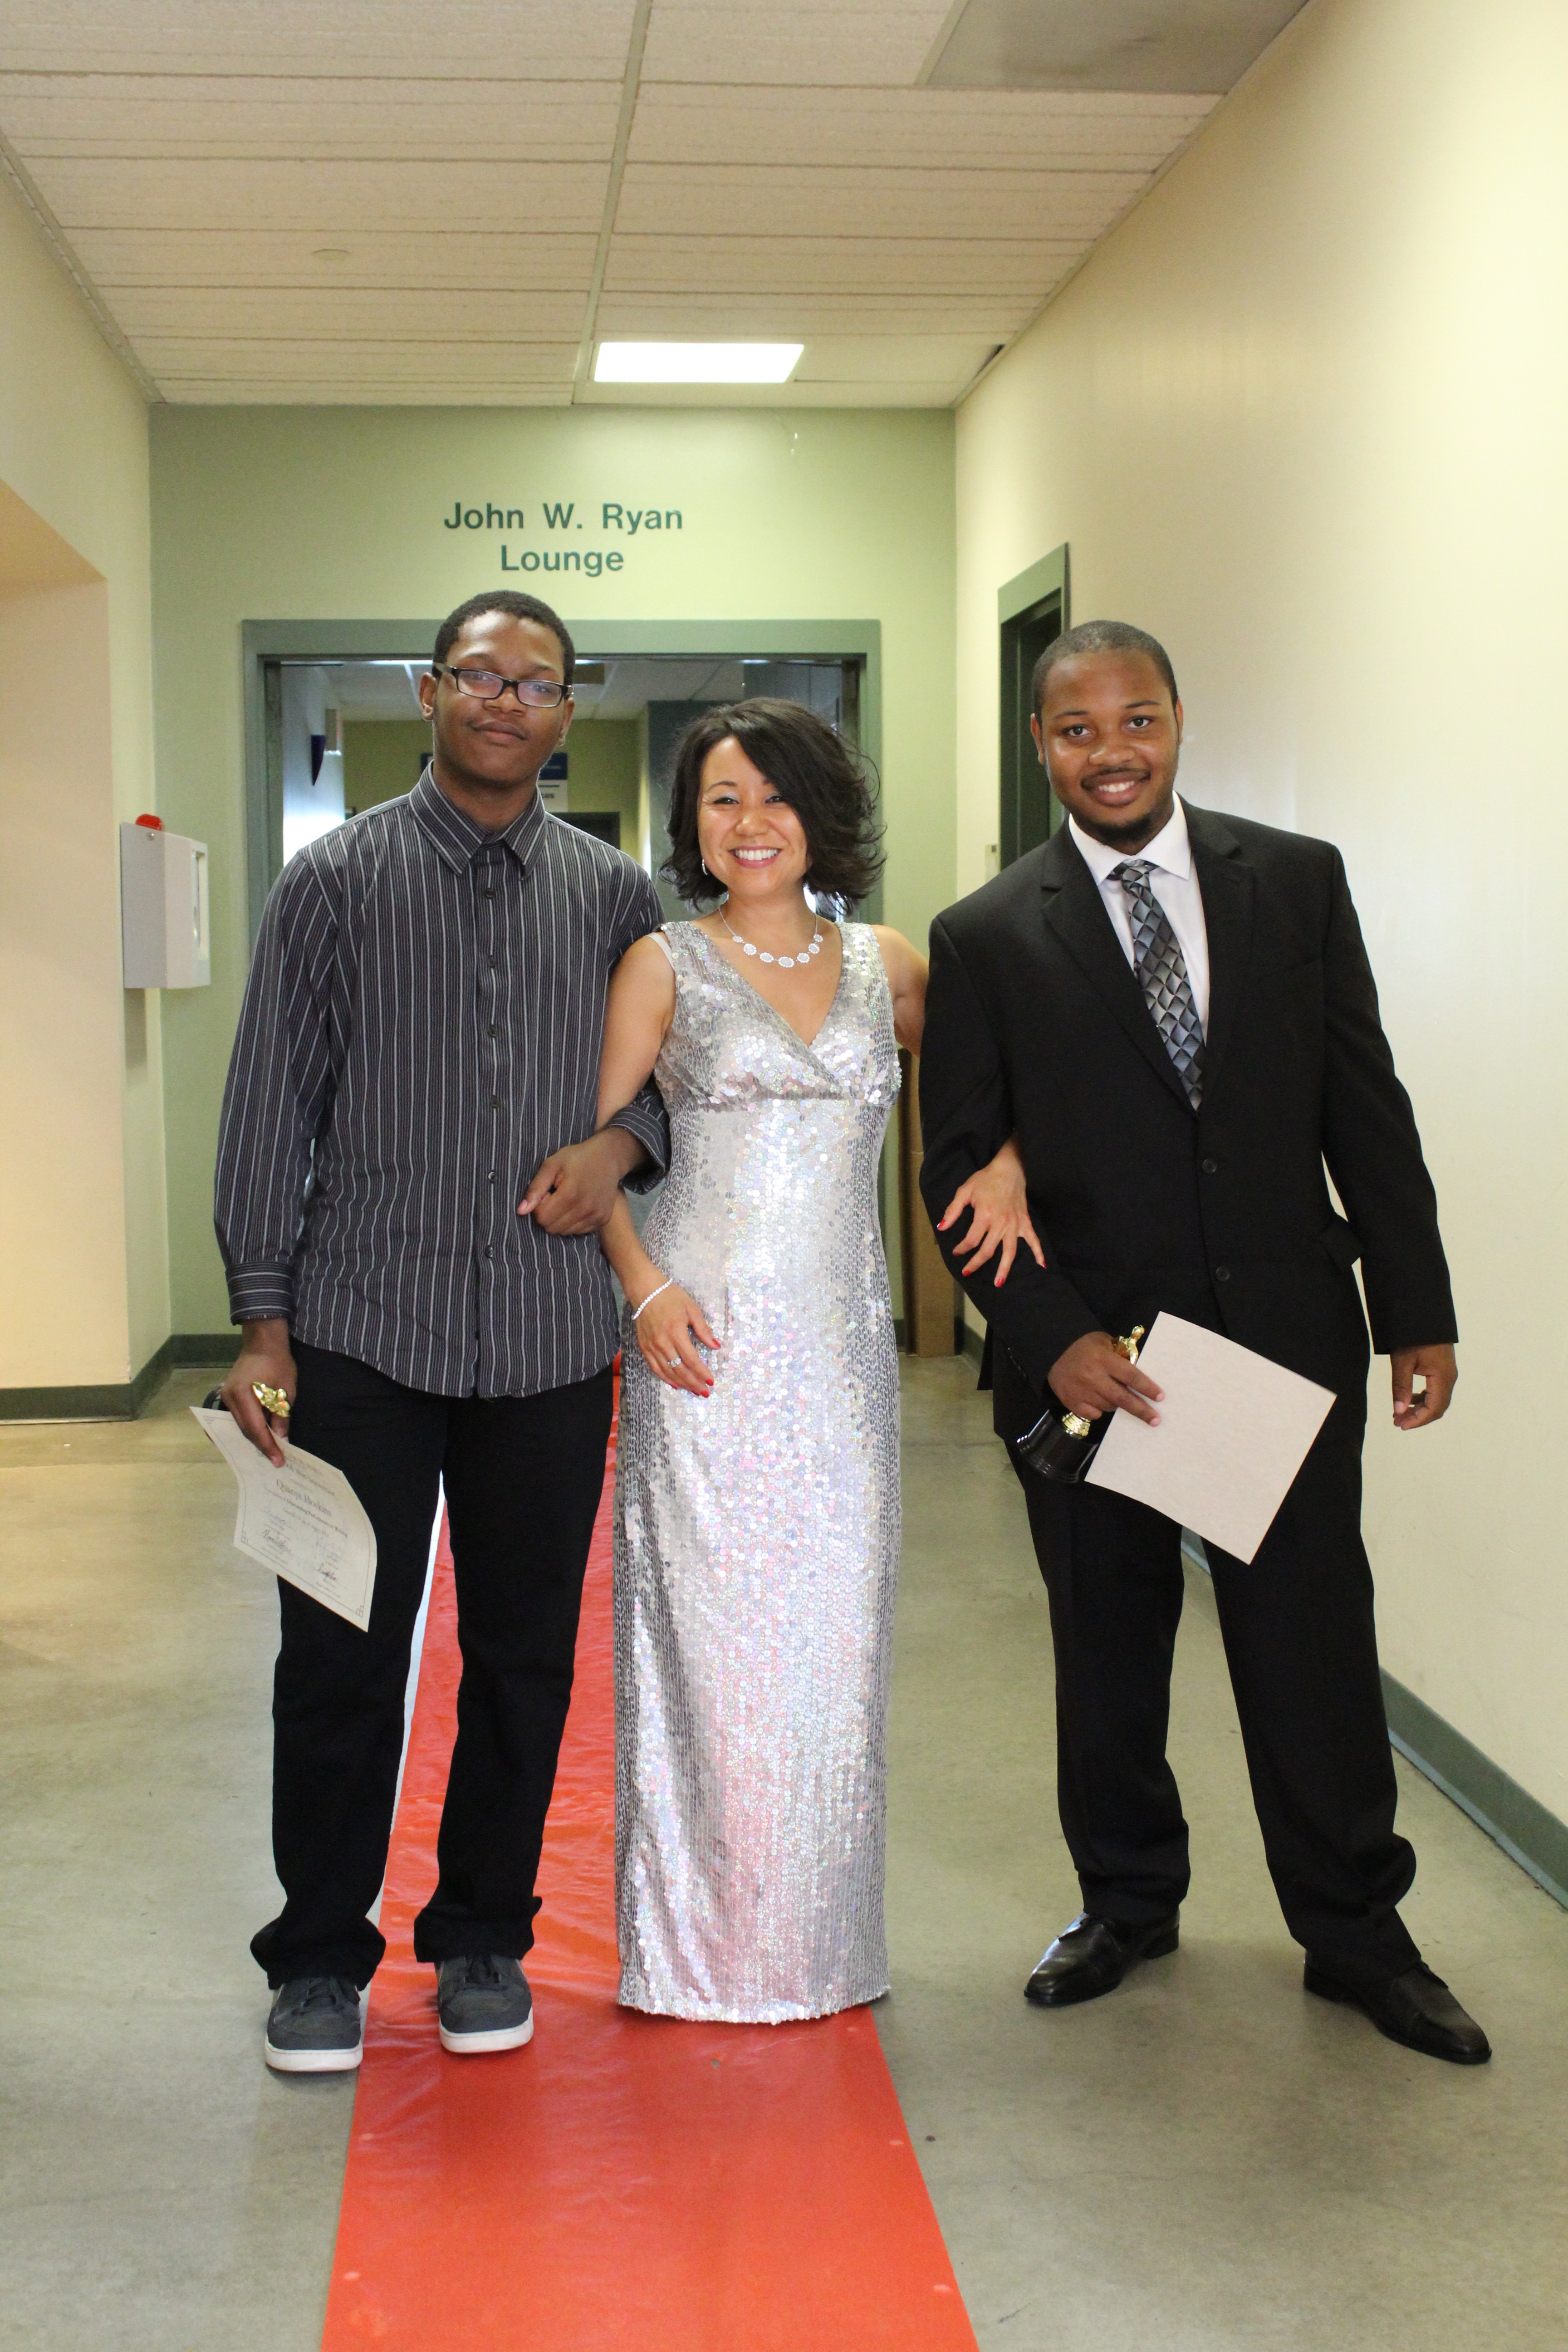 Merissa made a surprise entrance with her sparkling silver dress! She posed with her Urban Scholars students.